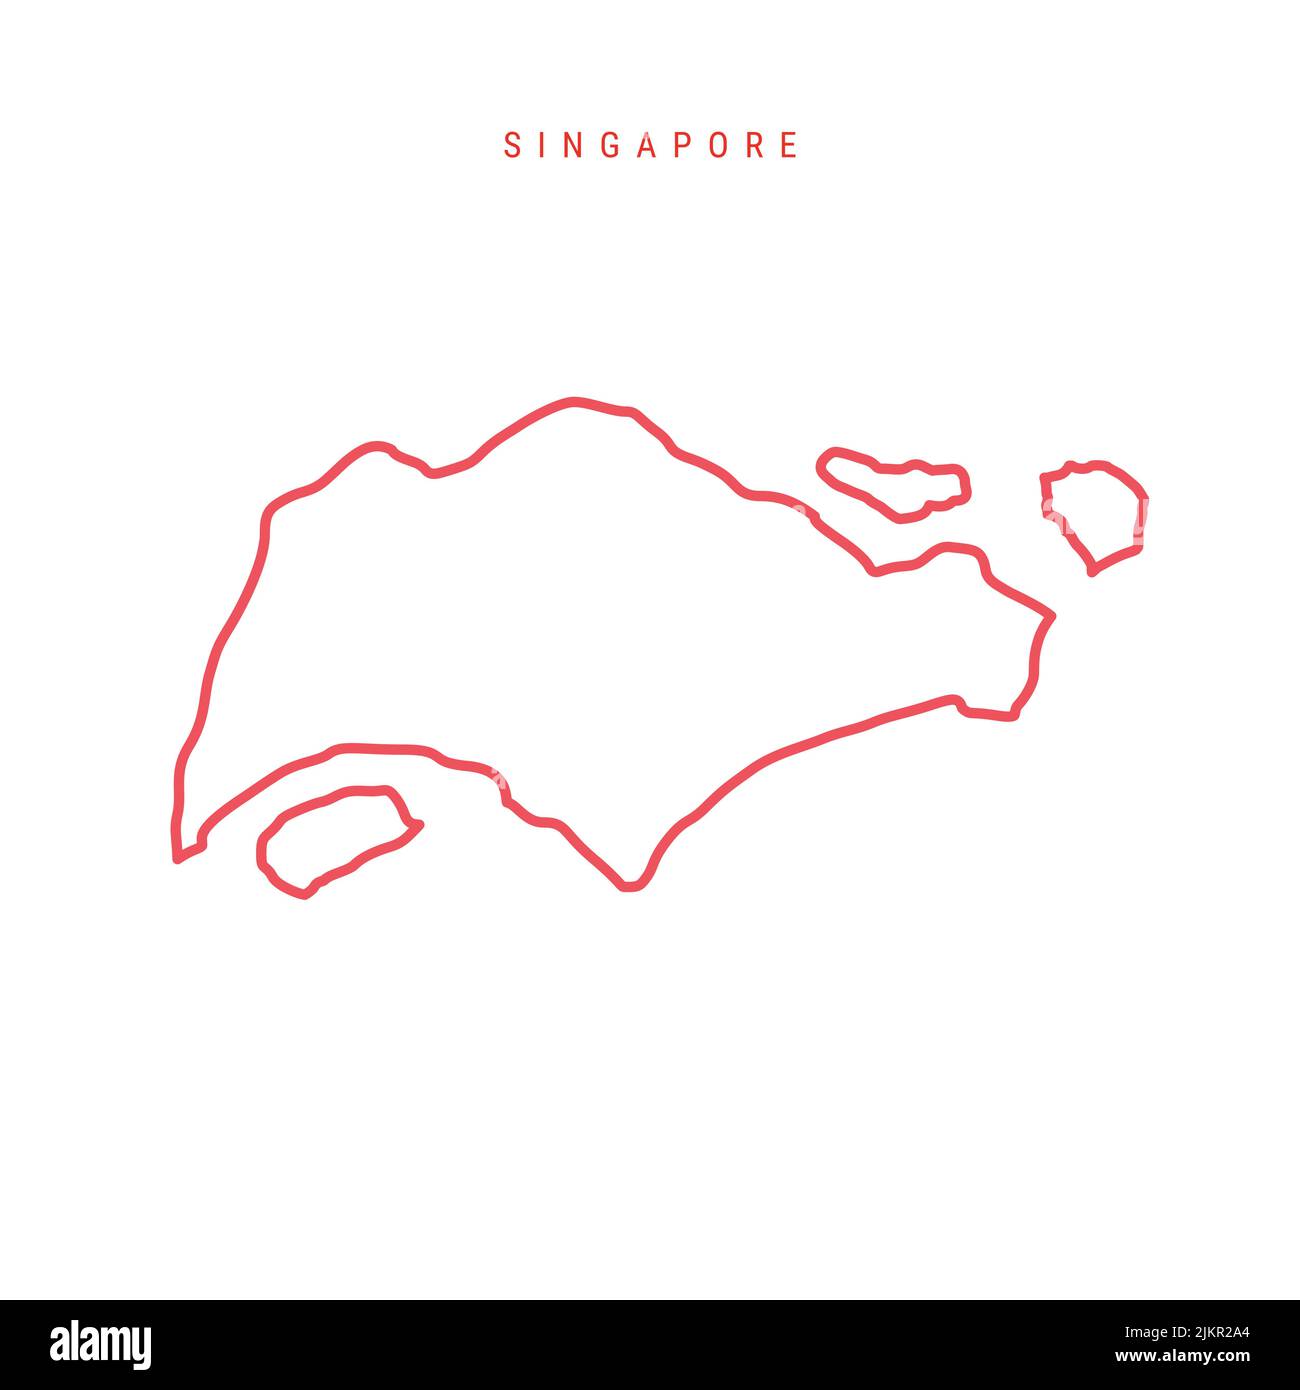 Singapore editable outline map. Singaporean red border. Country name. Adjust line weight. Change to any color. Vector illustration. Stock Vector